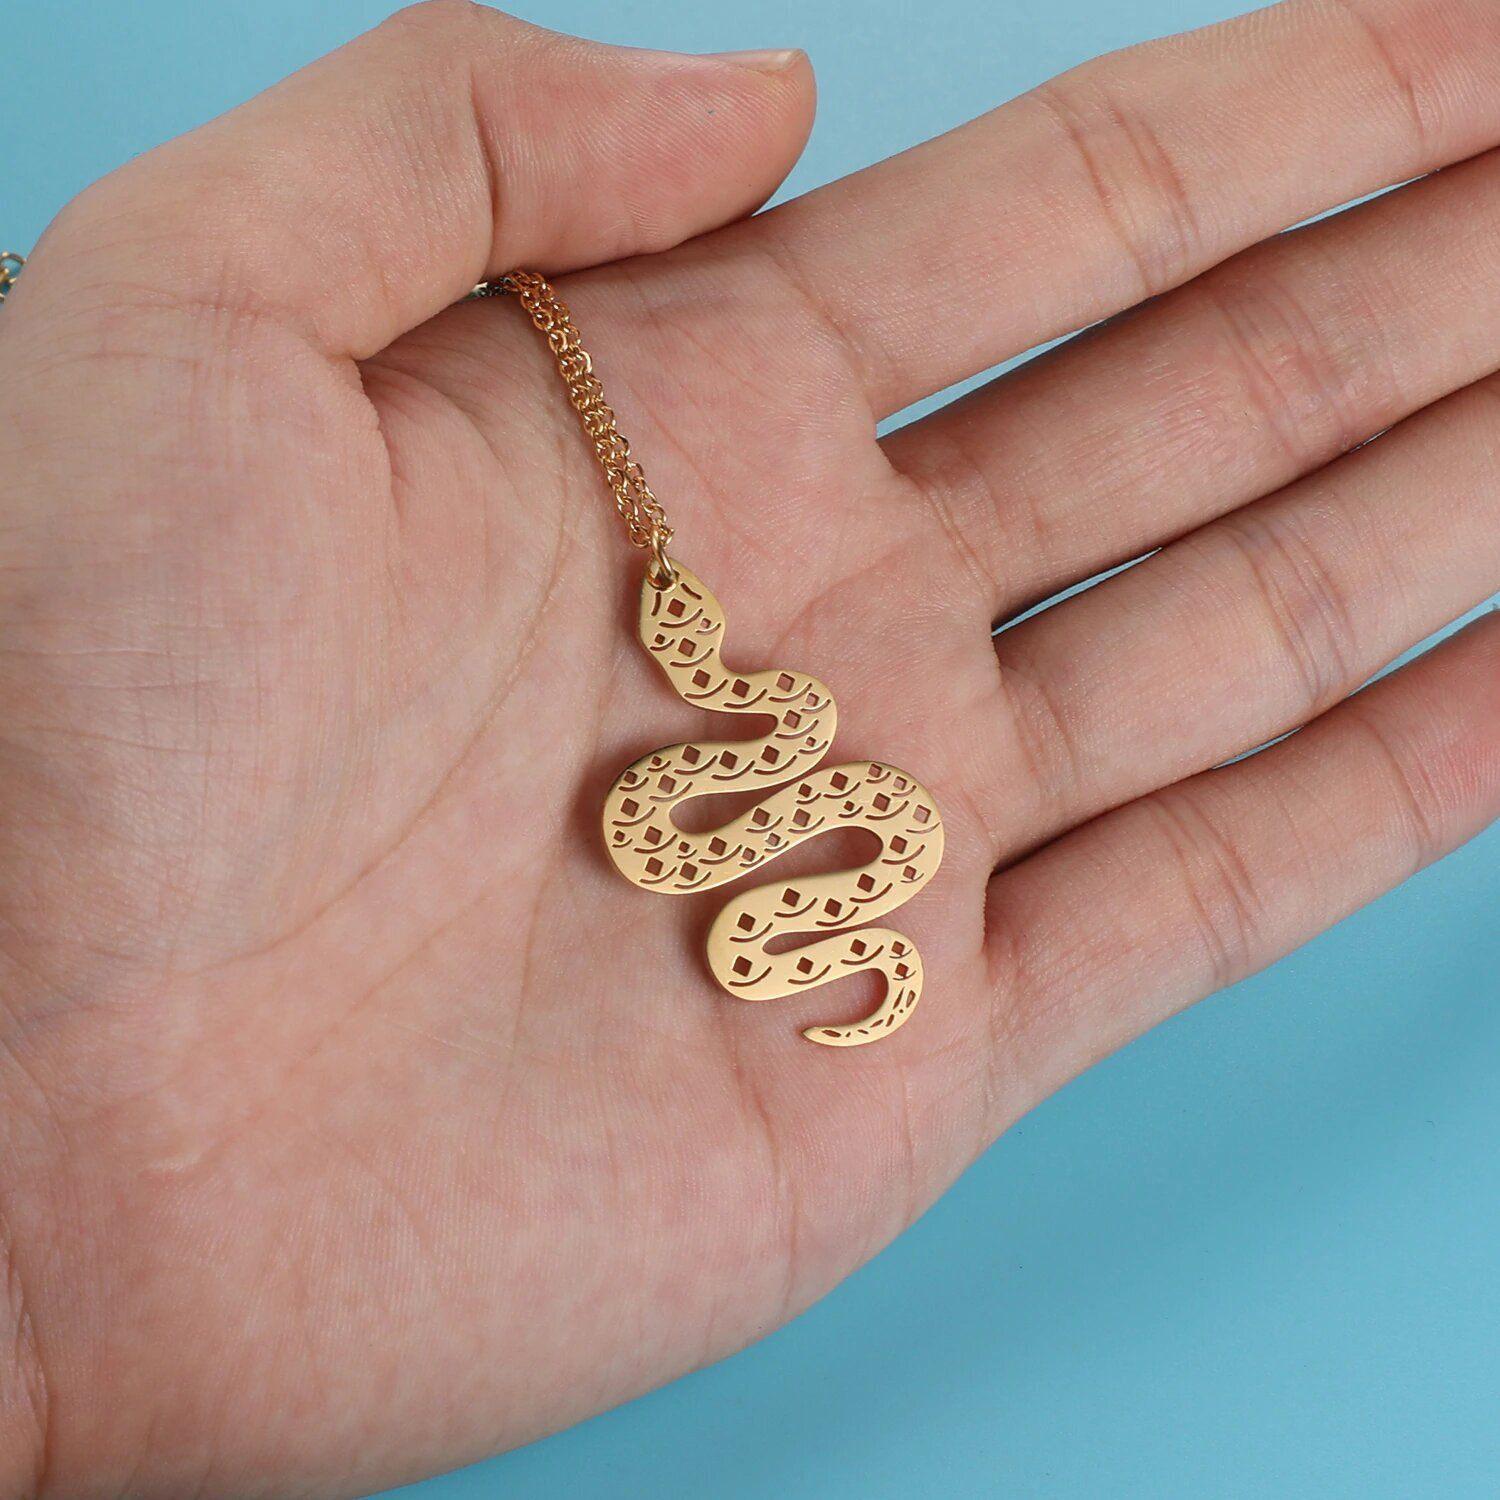 Gold Necklace Jewelry | Snakes Jewelry & Fashion